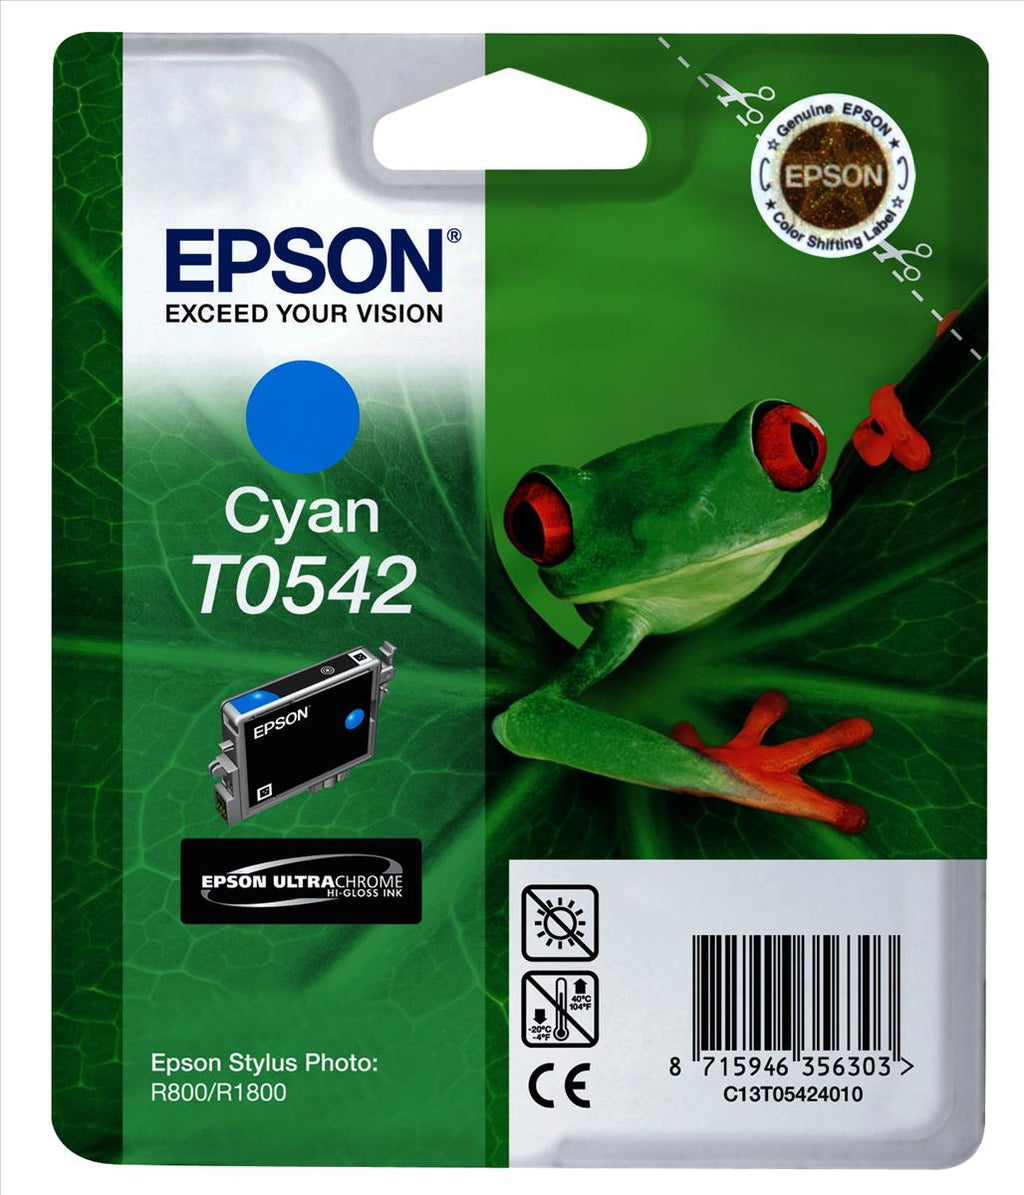 Epson T0542 Cyan Ink Cartridge - 440 pages - Out Of Ink